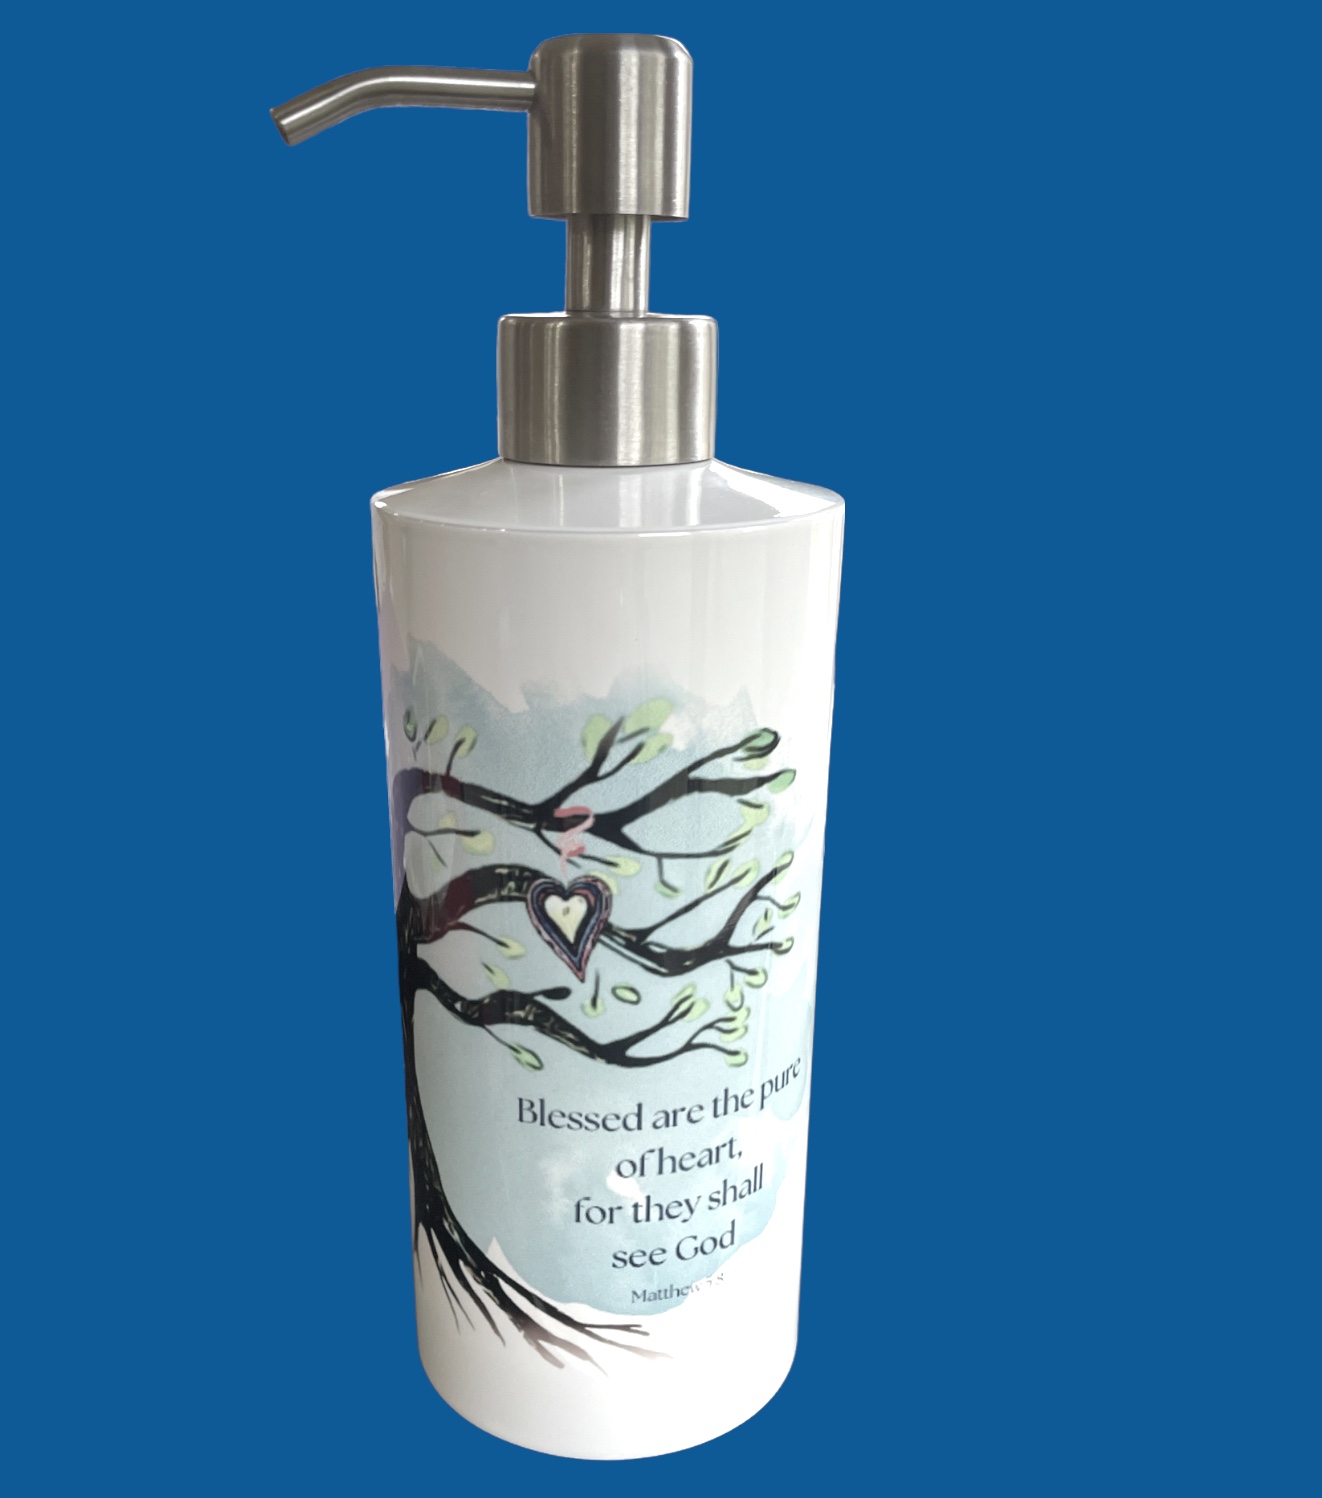 Soap dispenser  made with sublimation printing